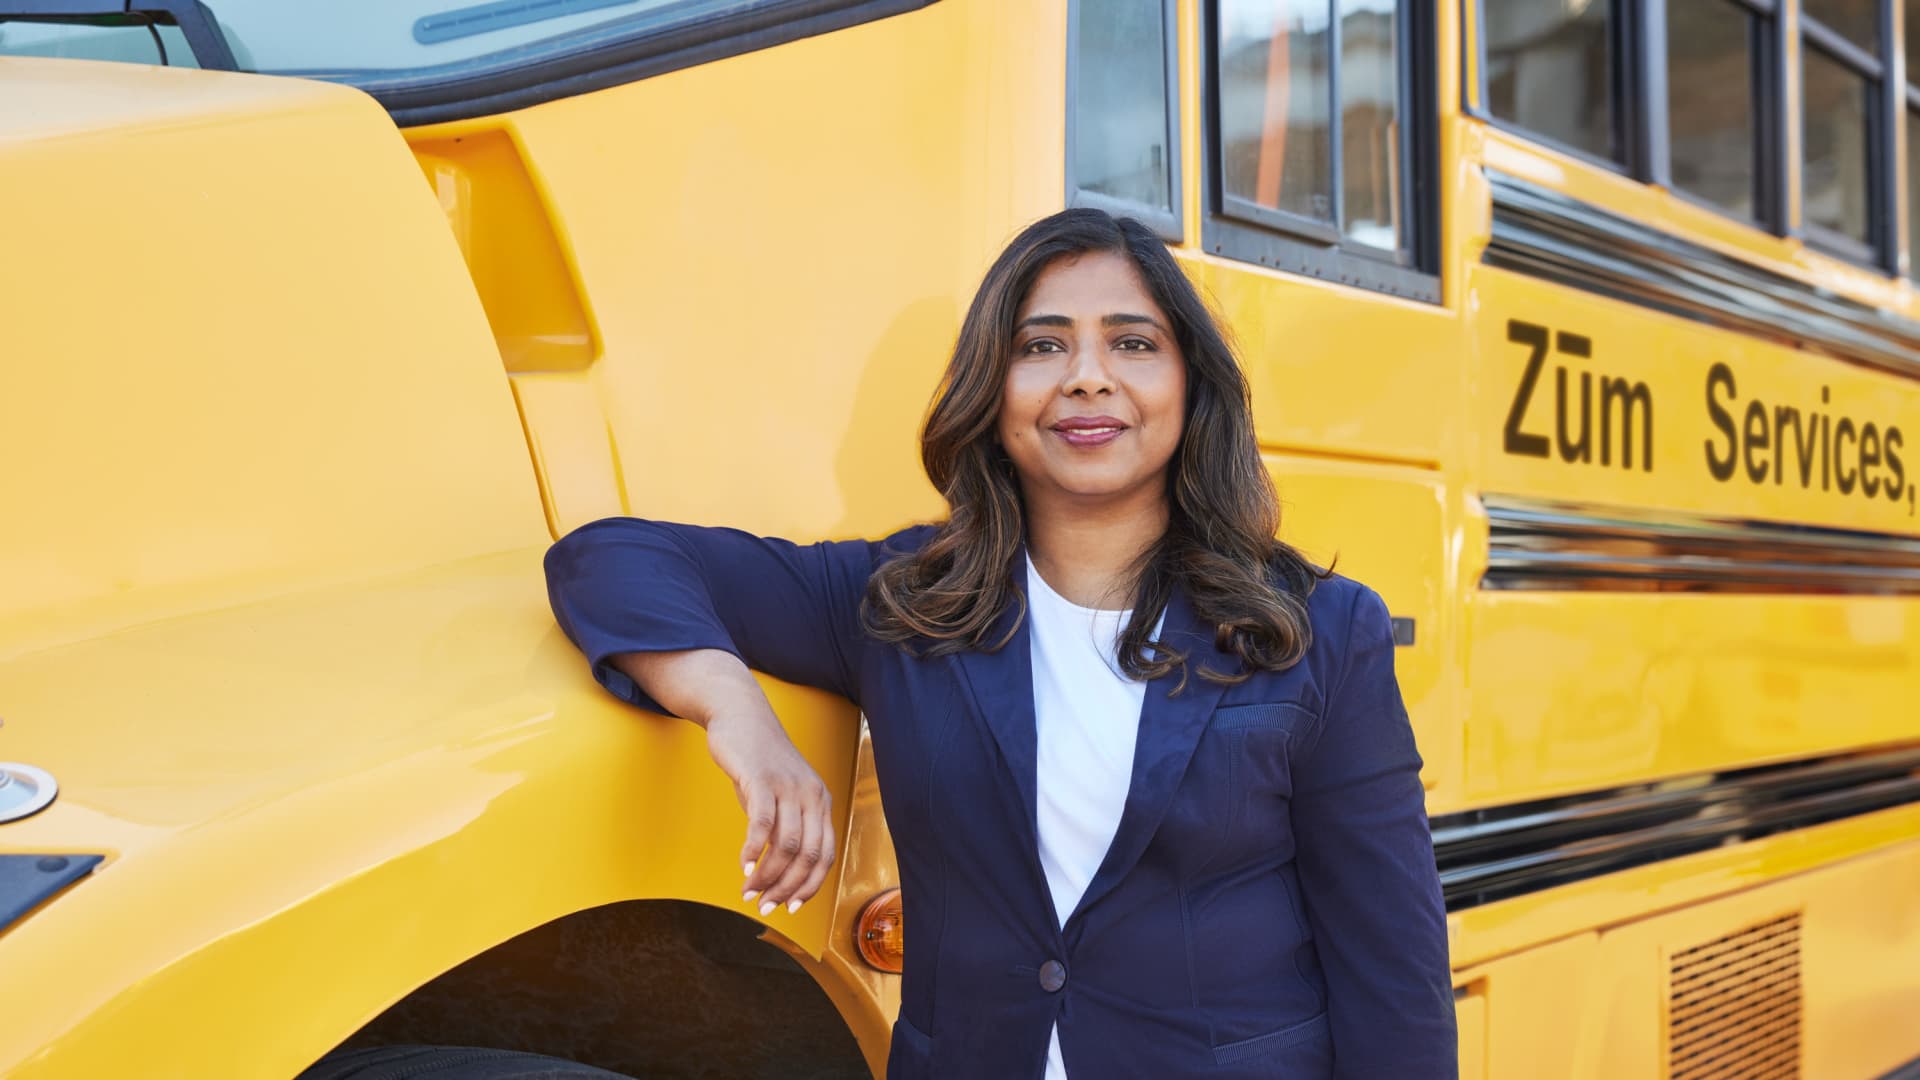 A working mother built a $1.3 billion startup inspired by unreliable school buses: It was ‘an aha moment’